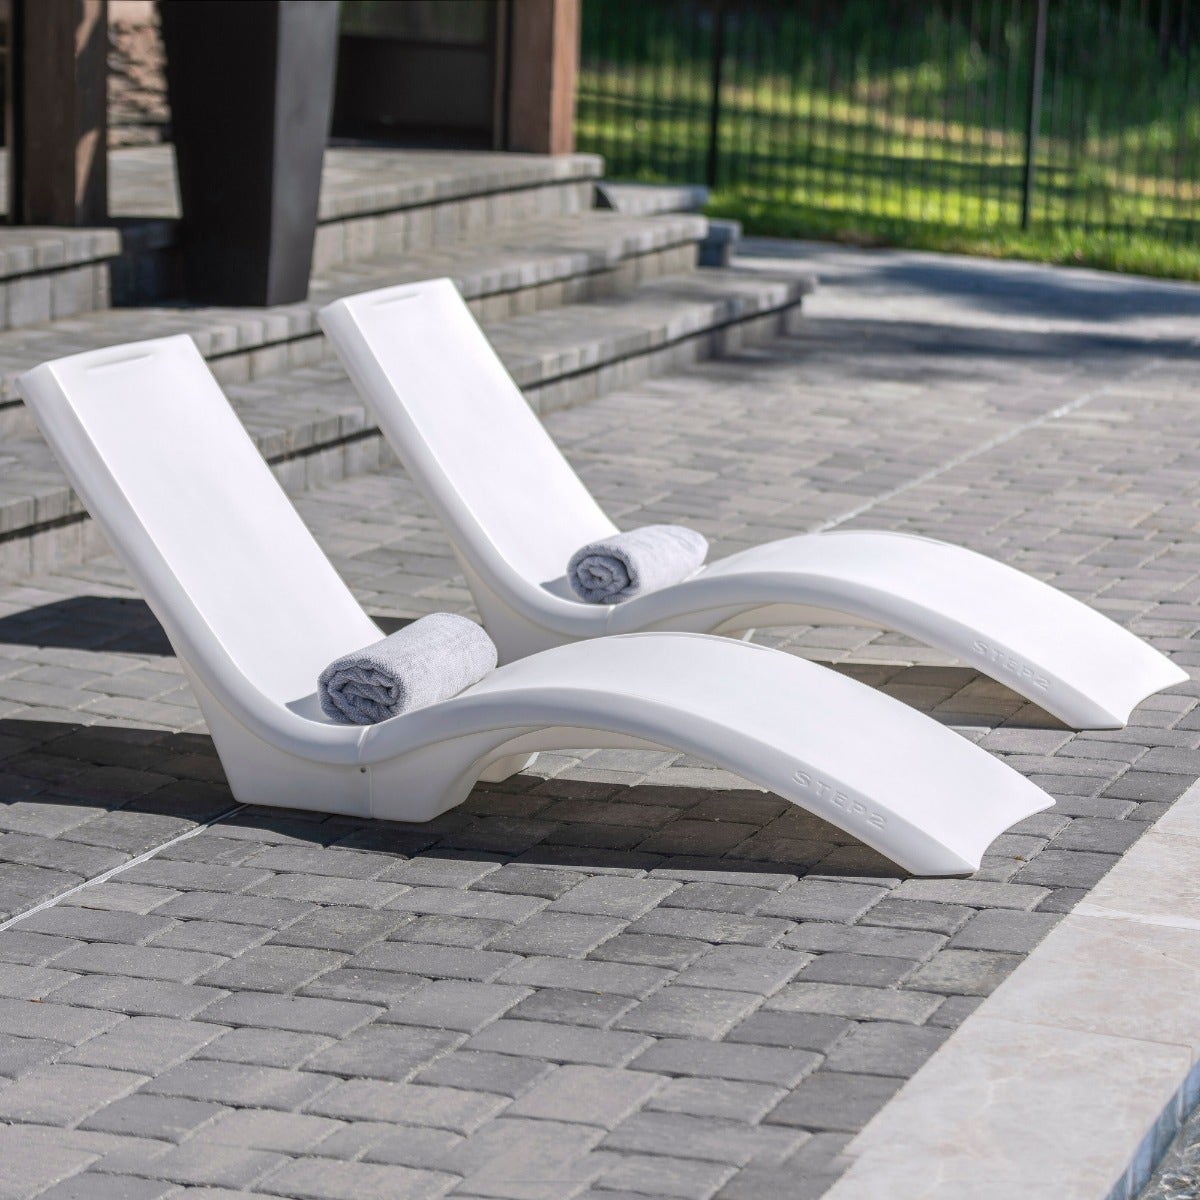 Vero Pool Lounger - White outside of the pool.